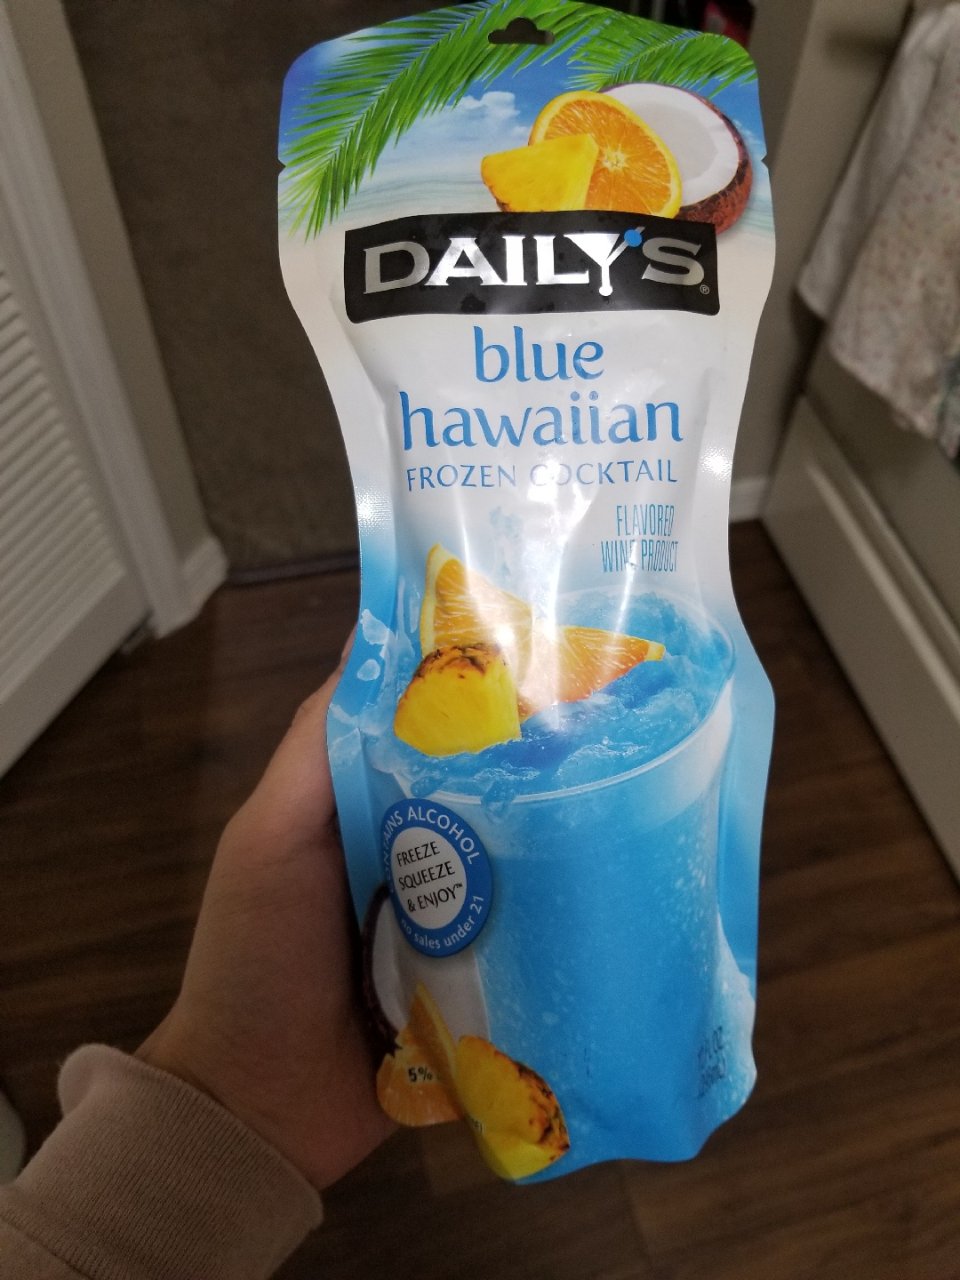 daily's,Cocktails,Walmart 沃尔玛